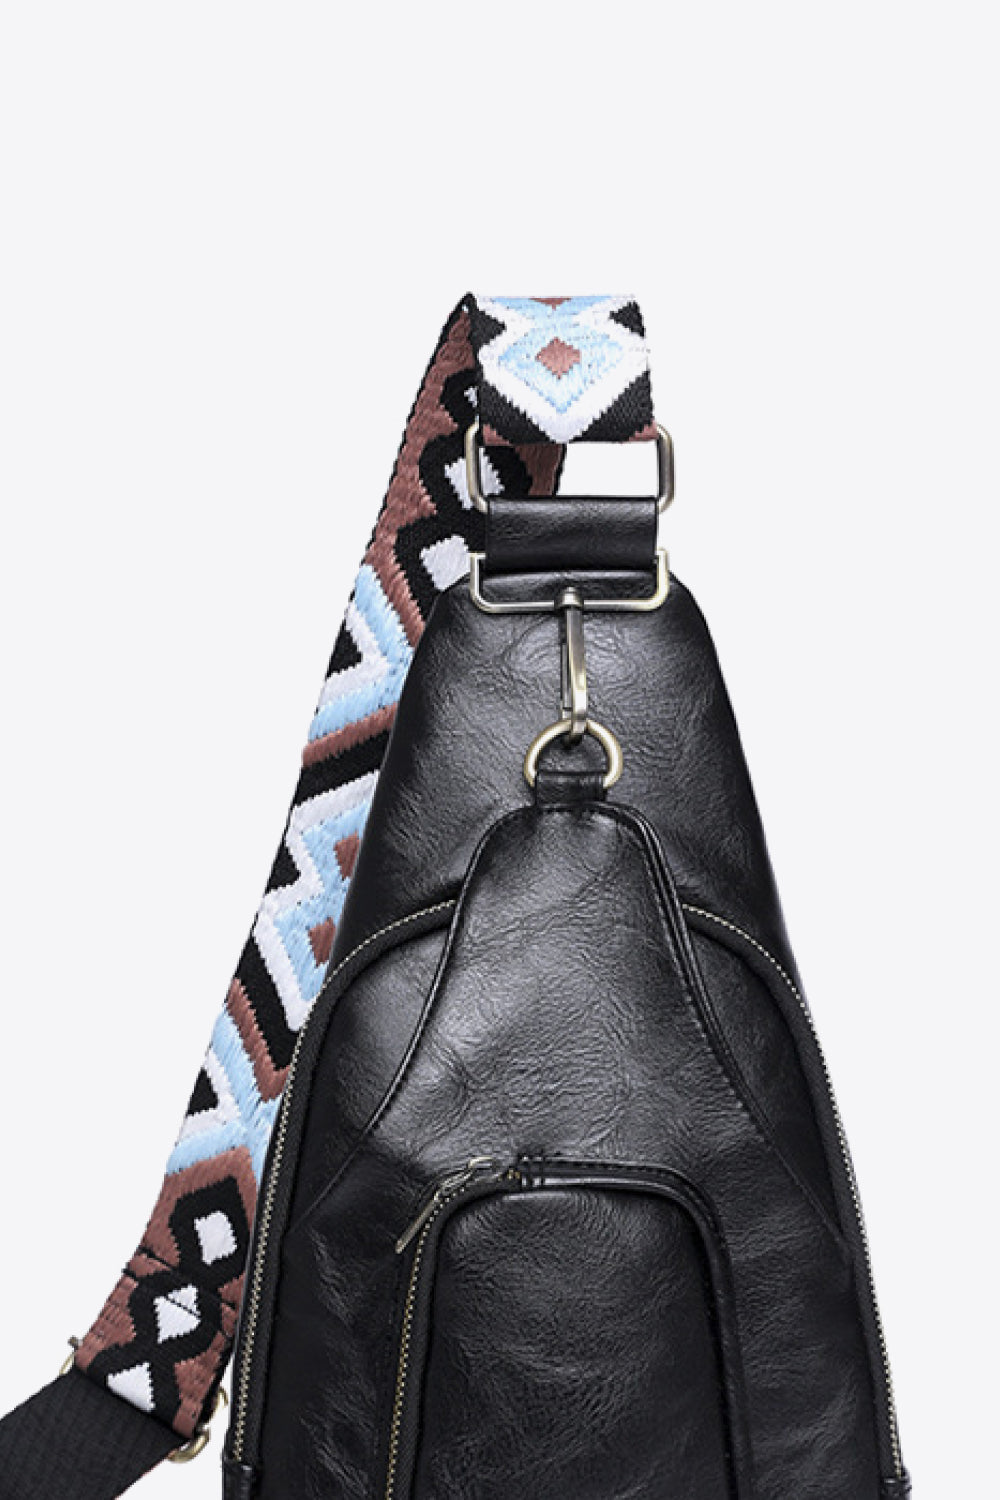 Faux Leather Sling Bag